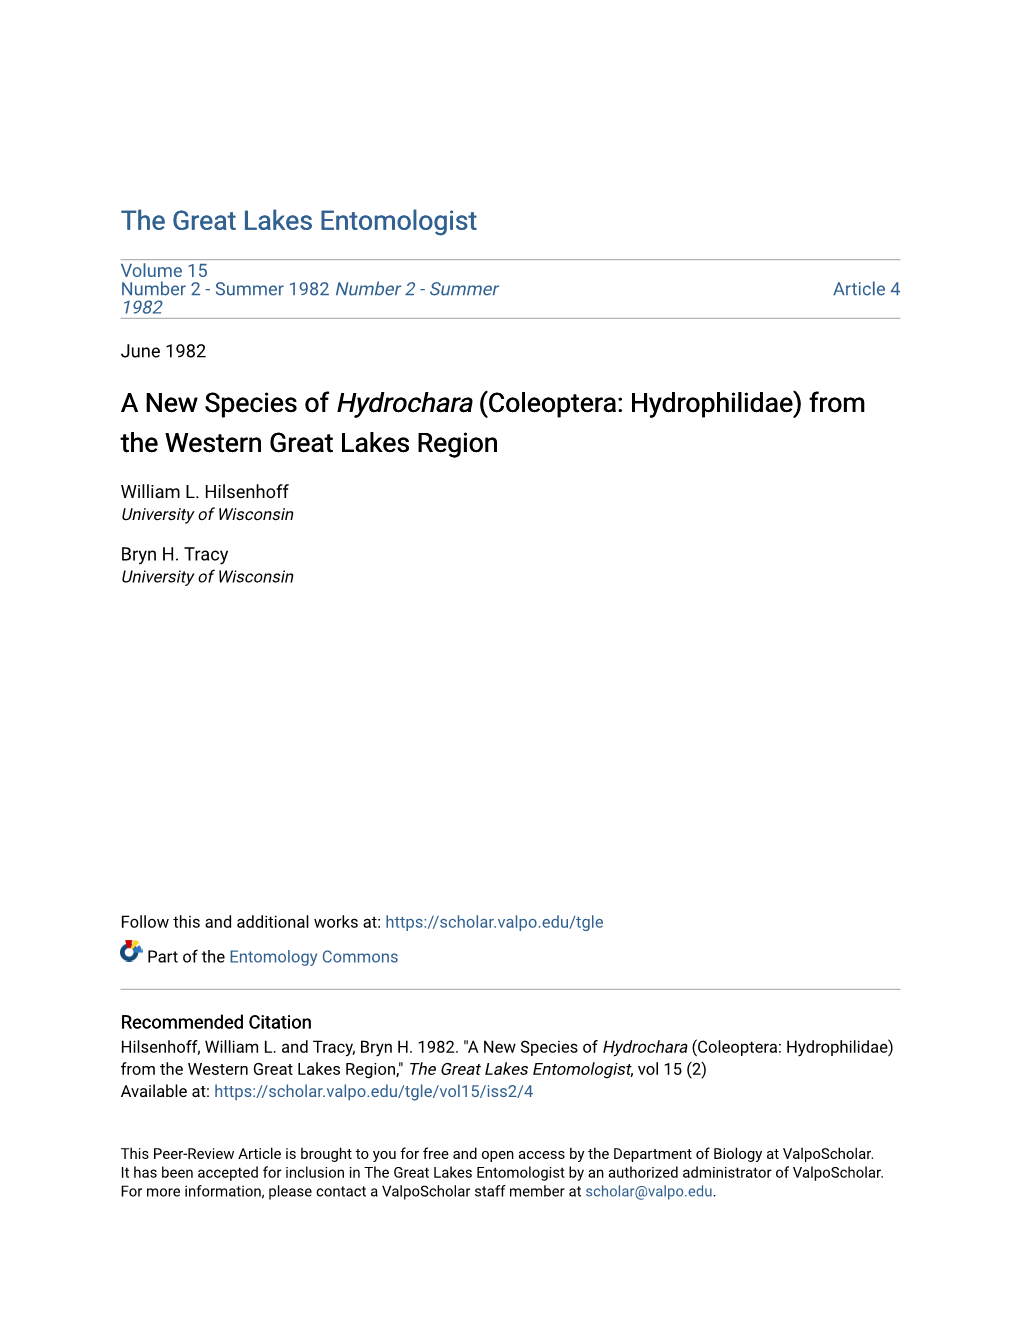 A New Species of Hydrochara (Coleoptera: Hydrophilidae) from the Western Great Lakes Region